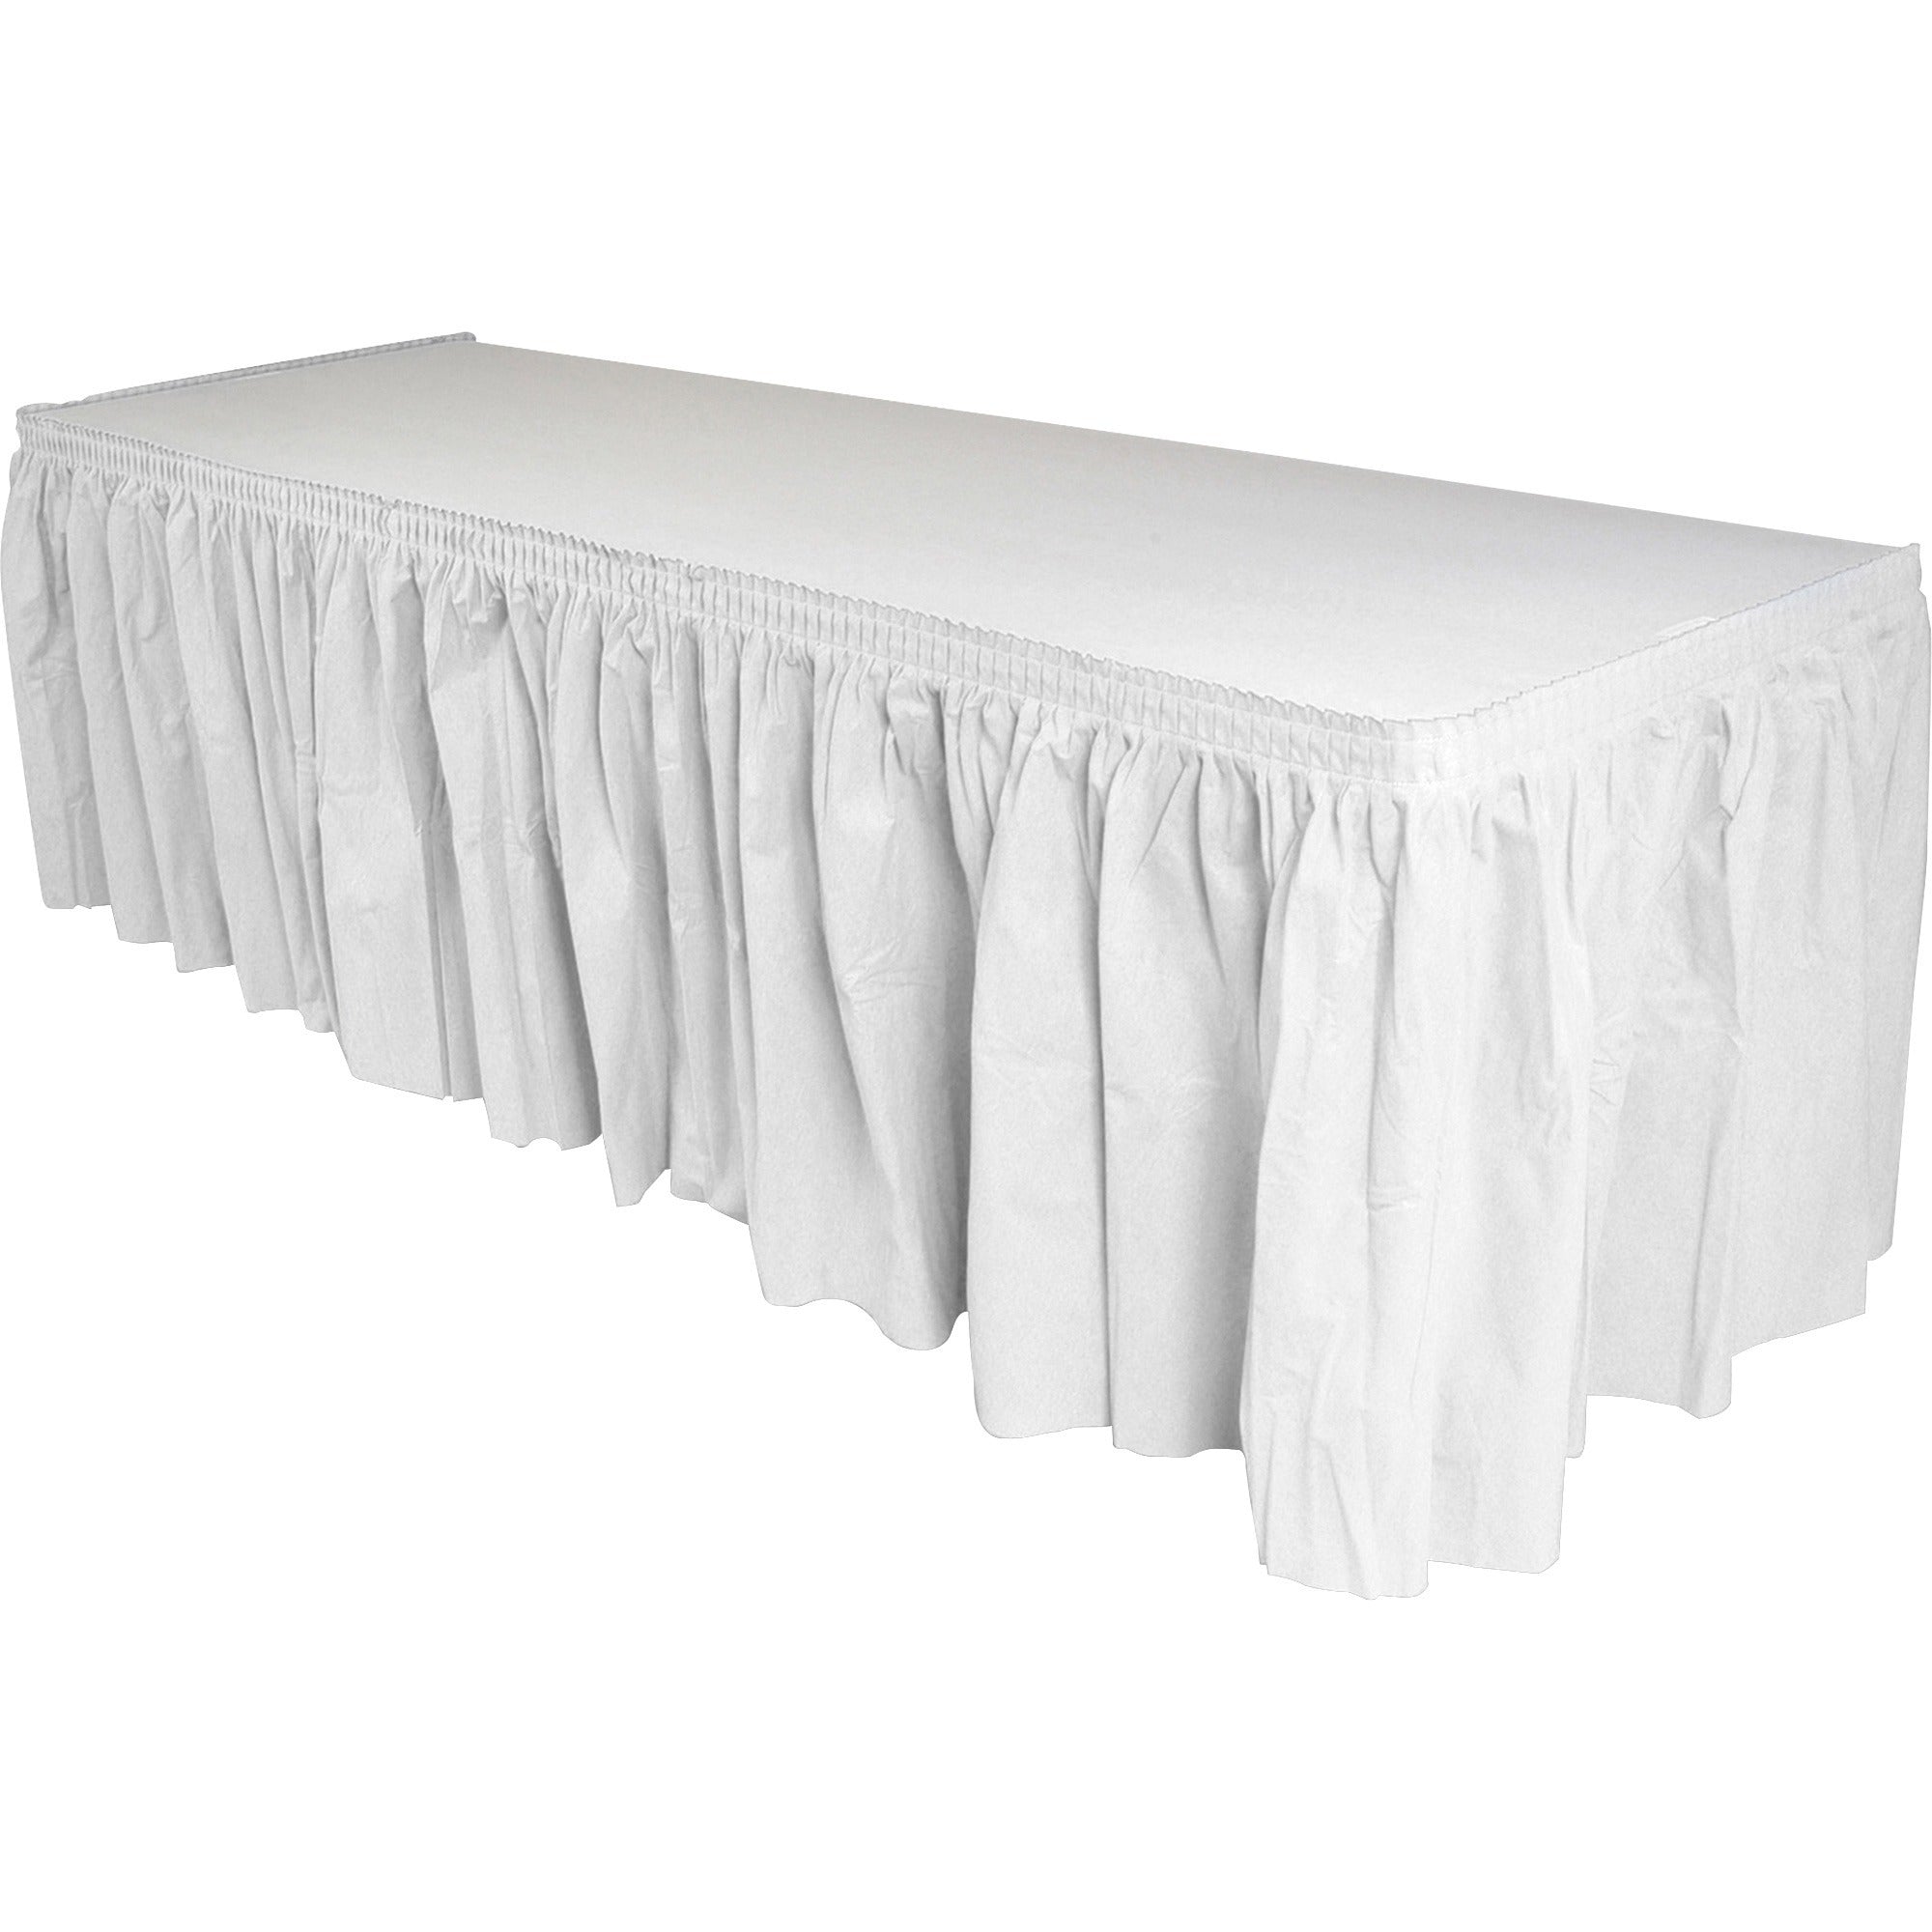 Genuine Joe Nonwoven Table Skirts - 14 ft Length x 29" Width - Adhesive Backing - Polyester - White - 1 Each - 